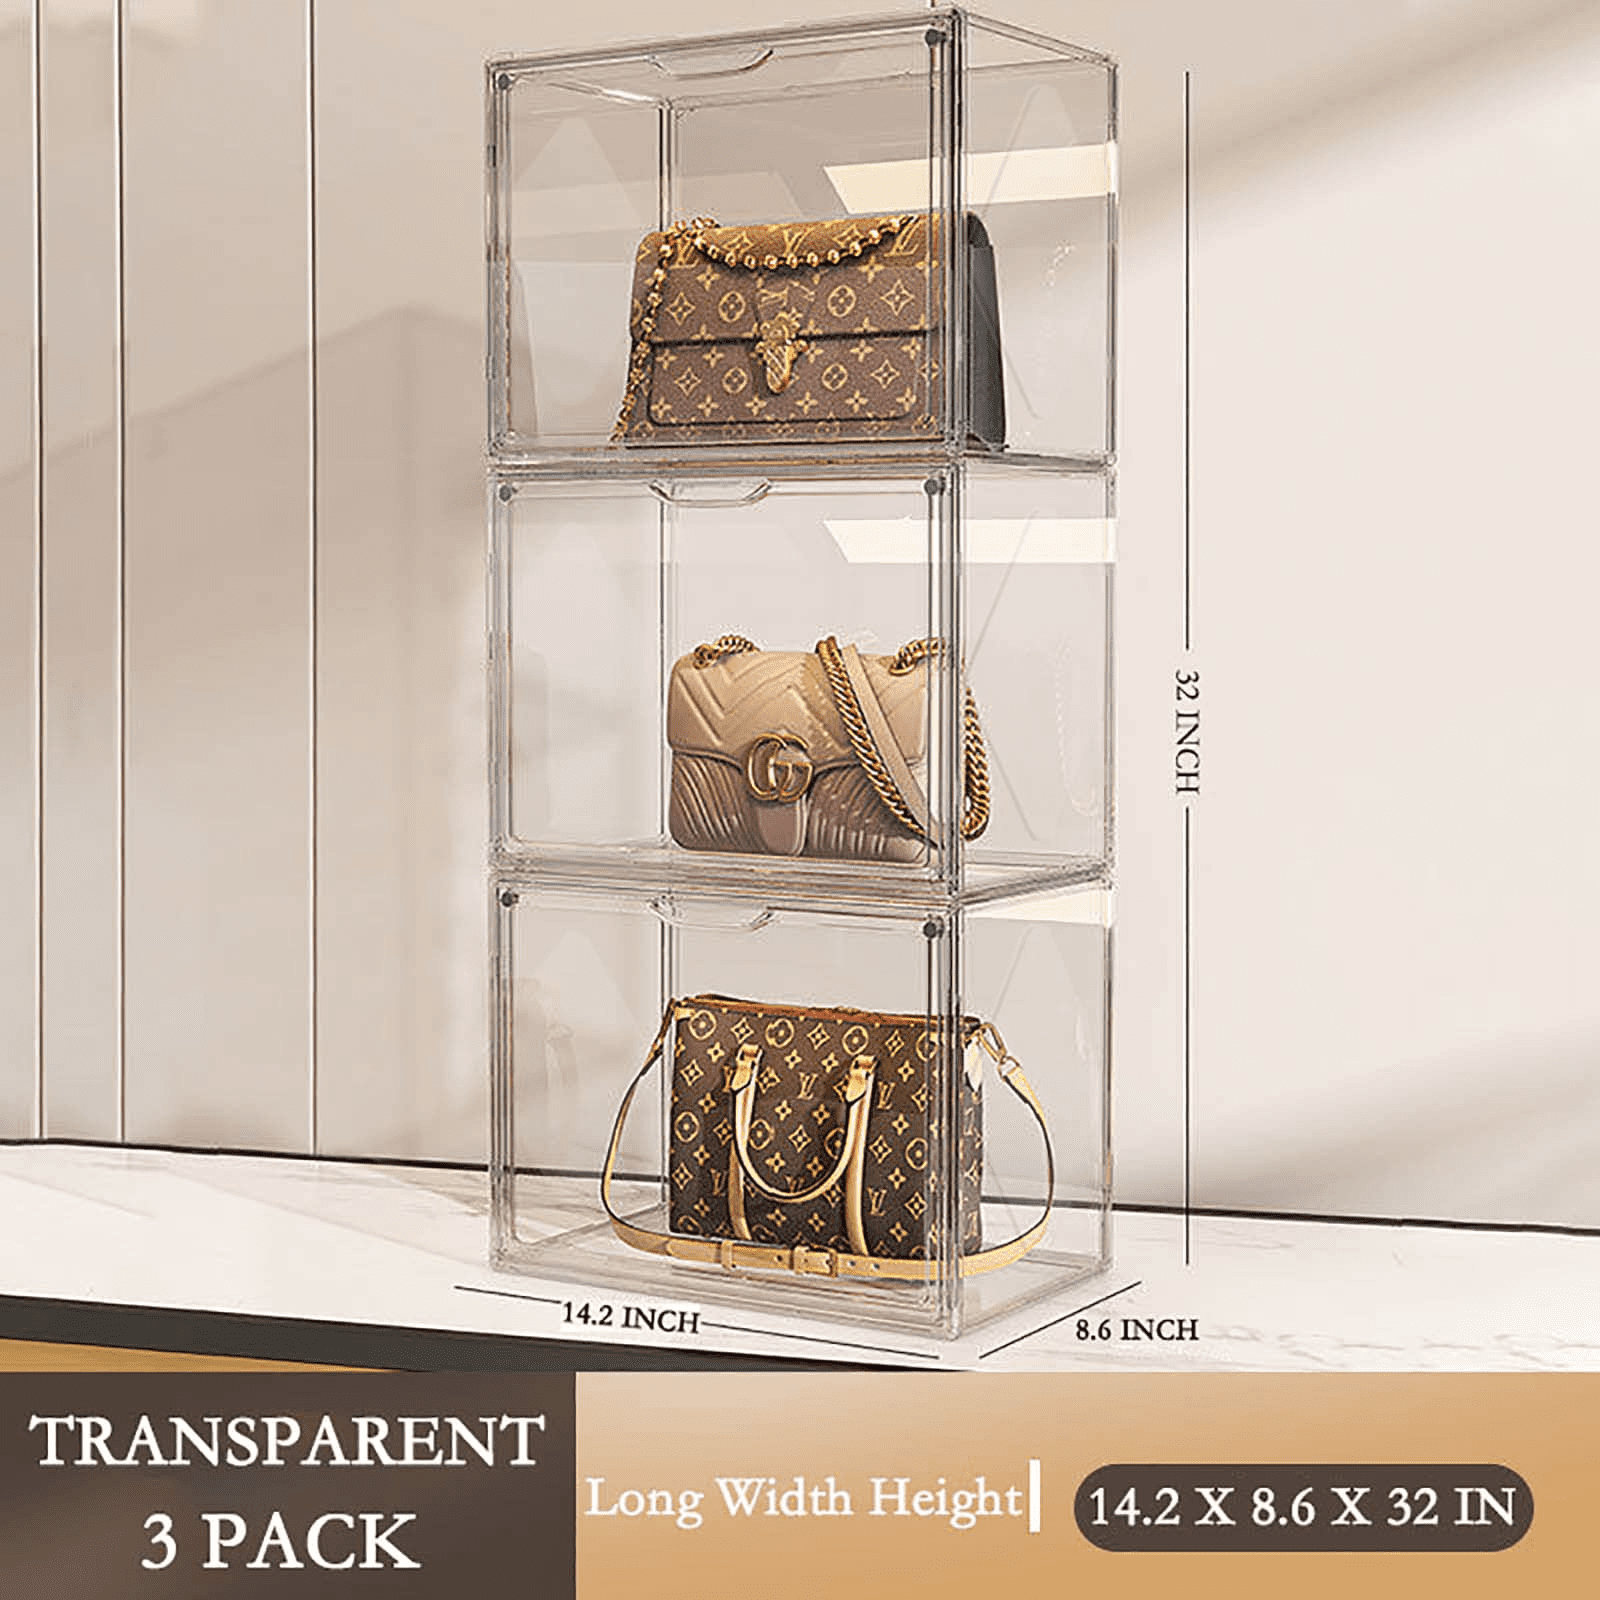 NiHome Clear Pet Plastic Purse Handbag Display Case Magnetic Door Storage Organizers for Closet 3pcs, Anti Dust Luxury Stackable Bag Container Box